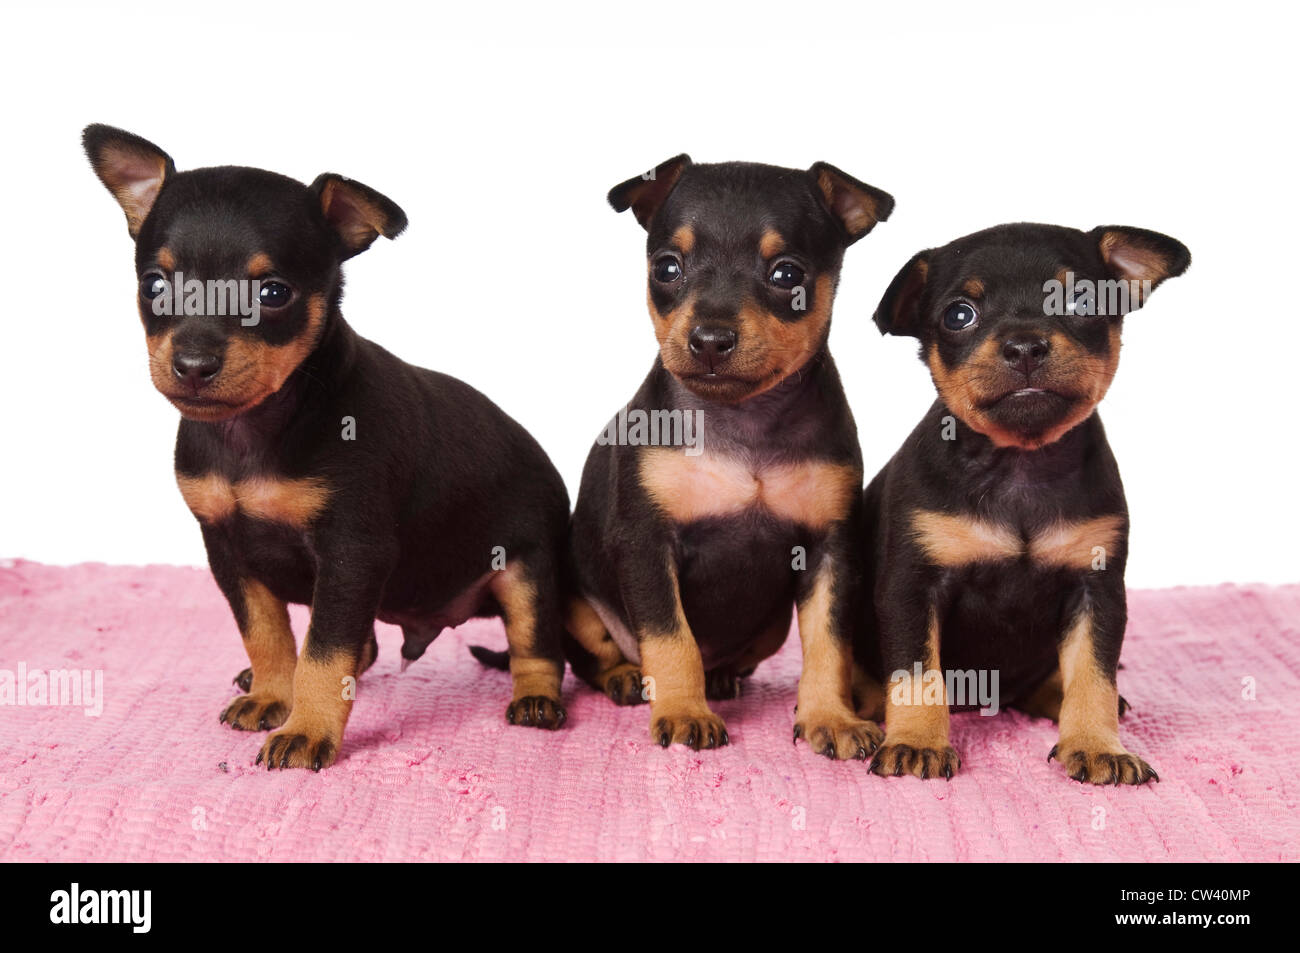 Prague Rattler. Three puppies on a pink blanket. Studio picture against a white background Stock Photo